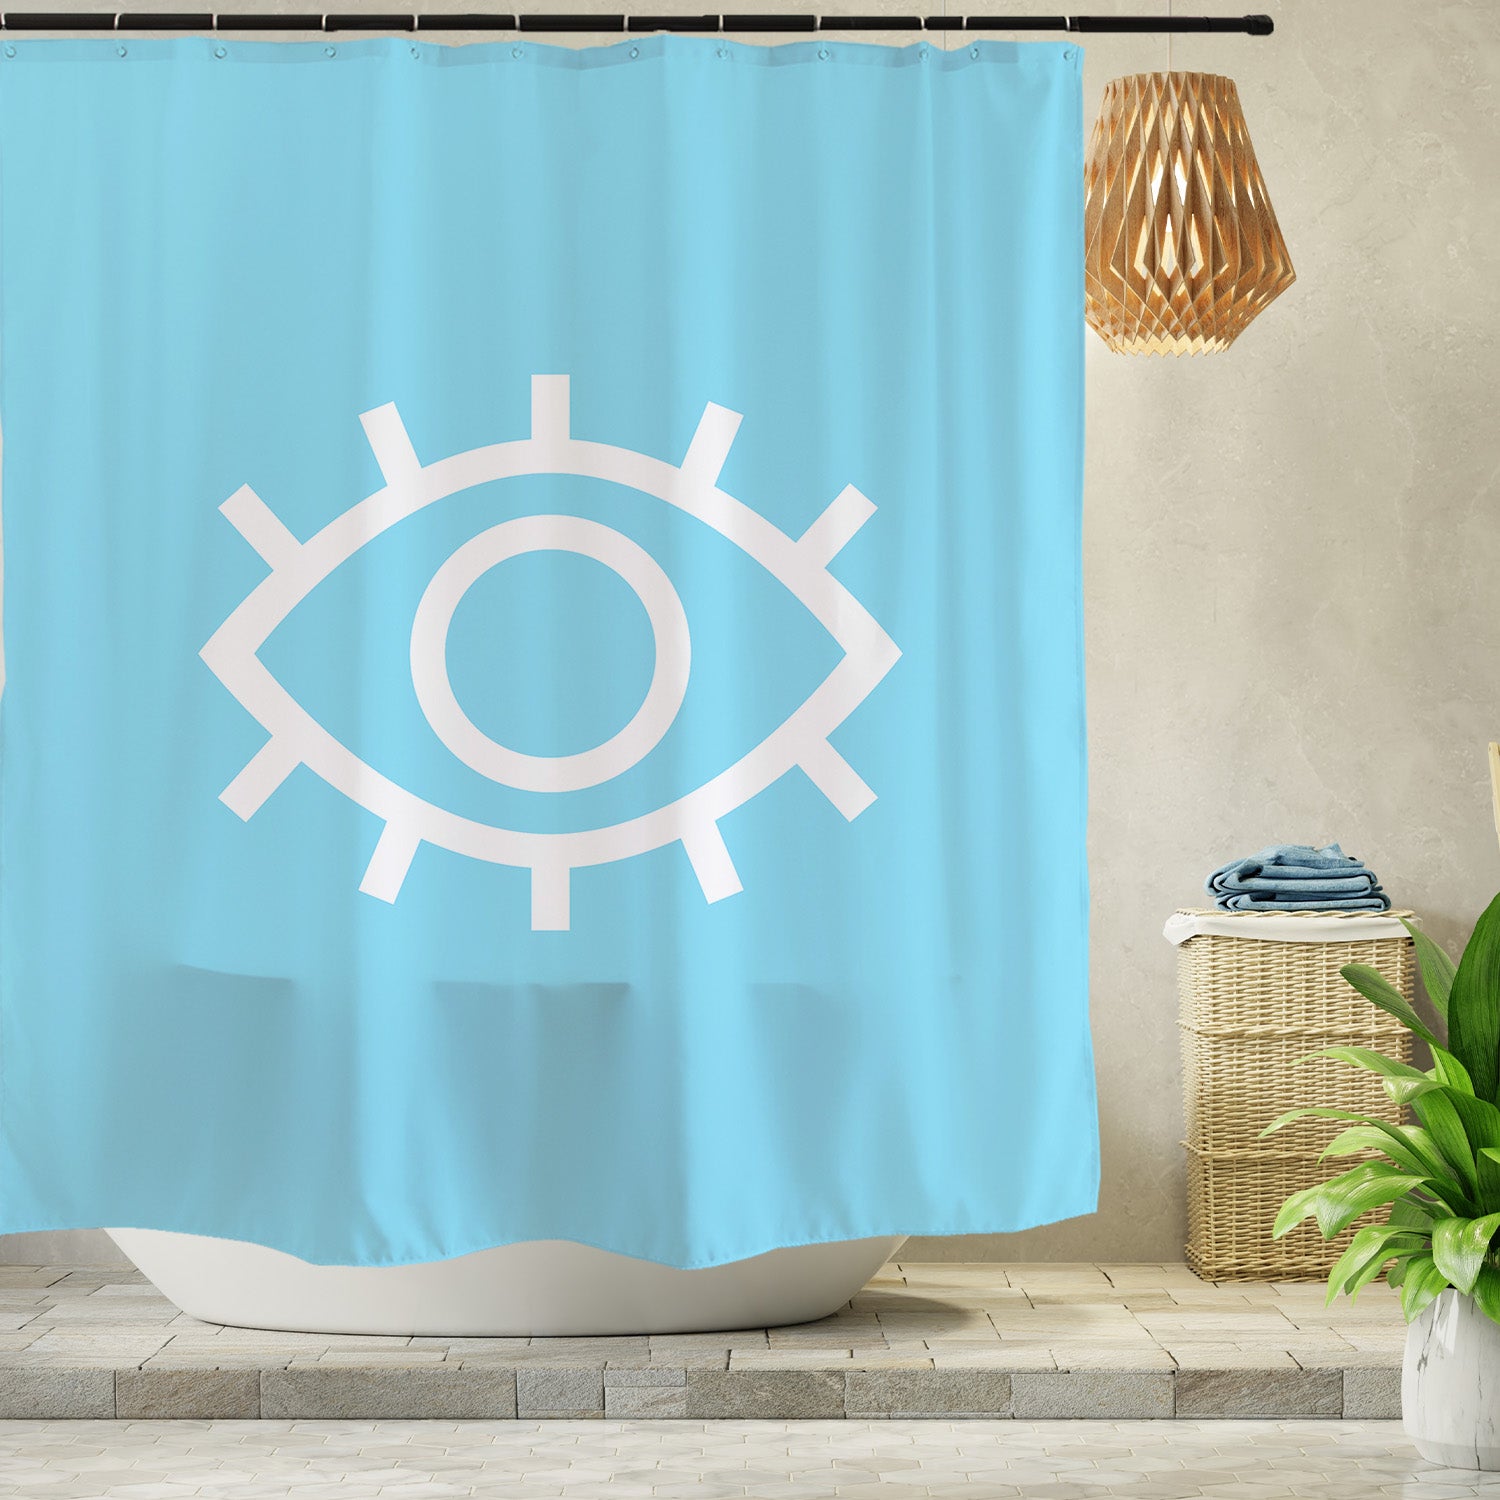 Feblilac the Eye of the Blue Devil Shower Curtain with Hooks